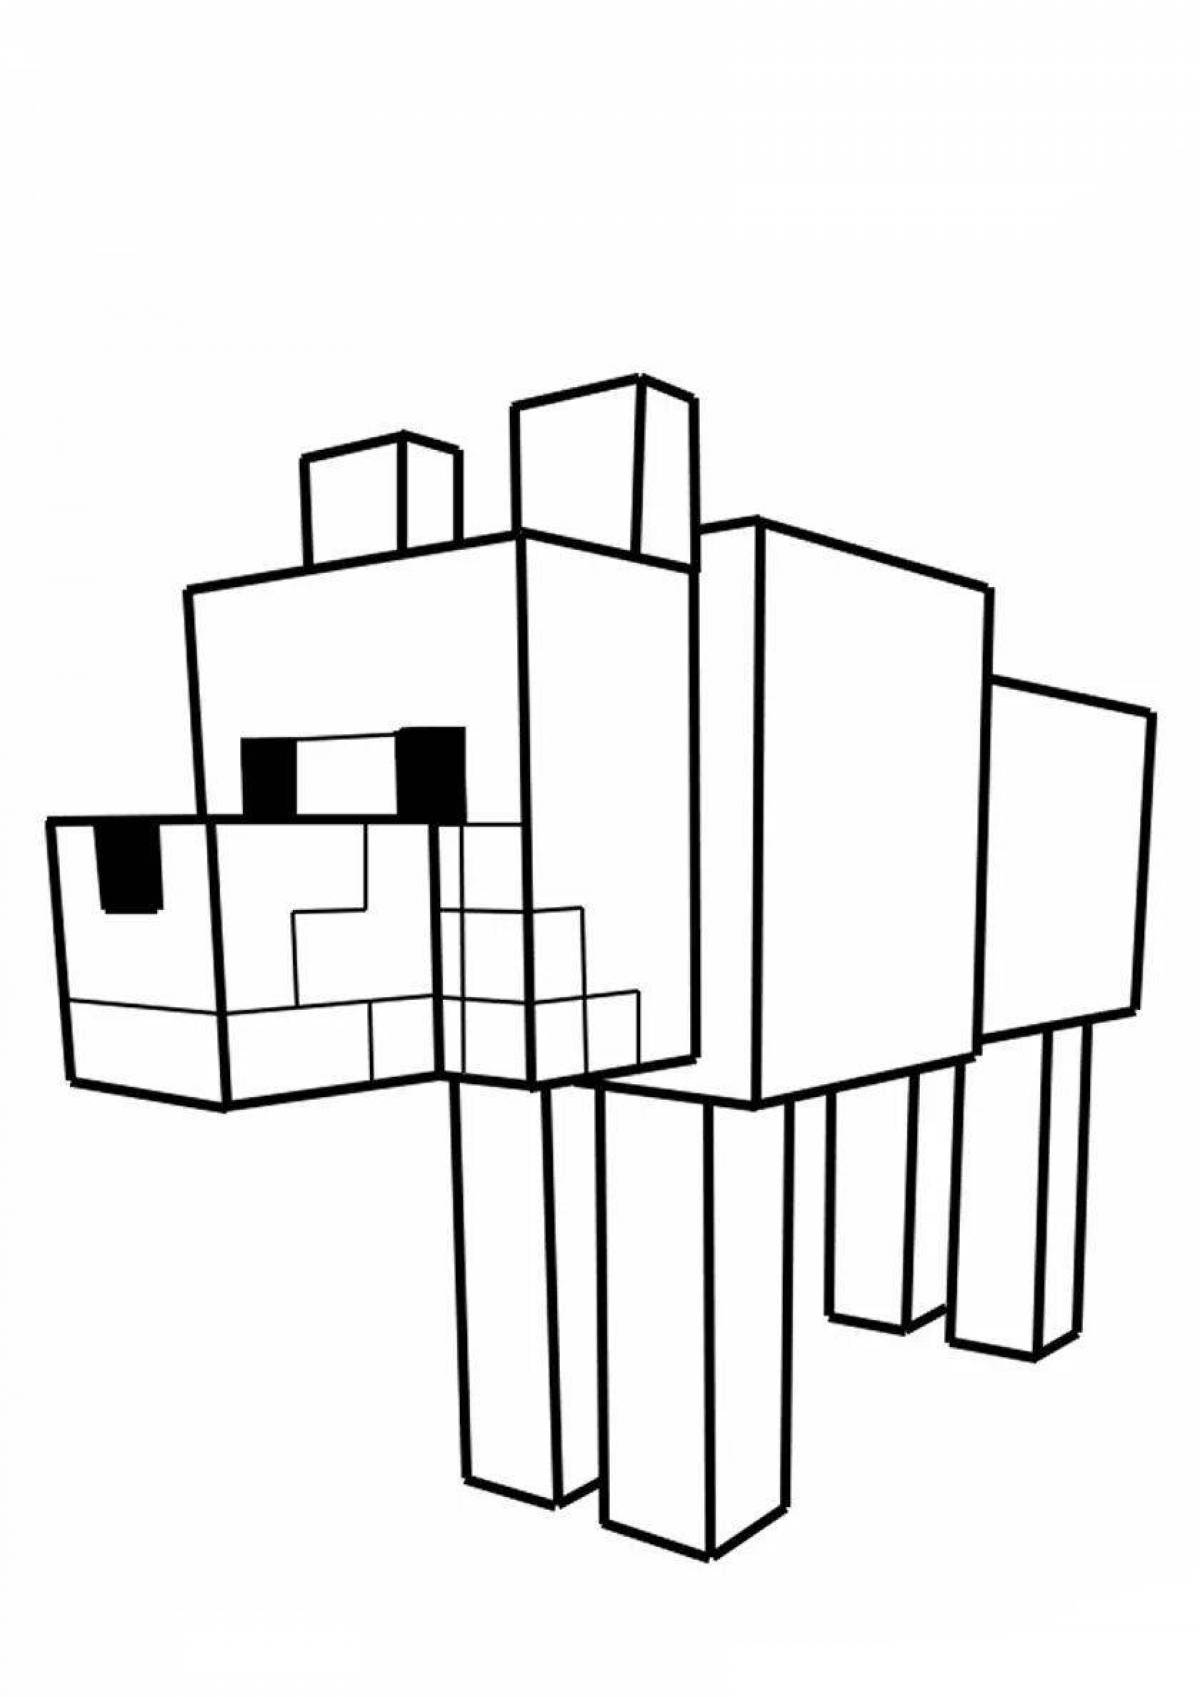 Adorable minecraft horse coloring page